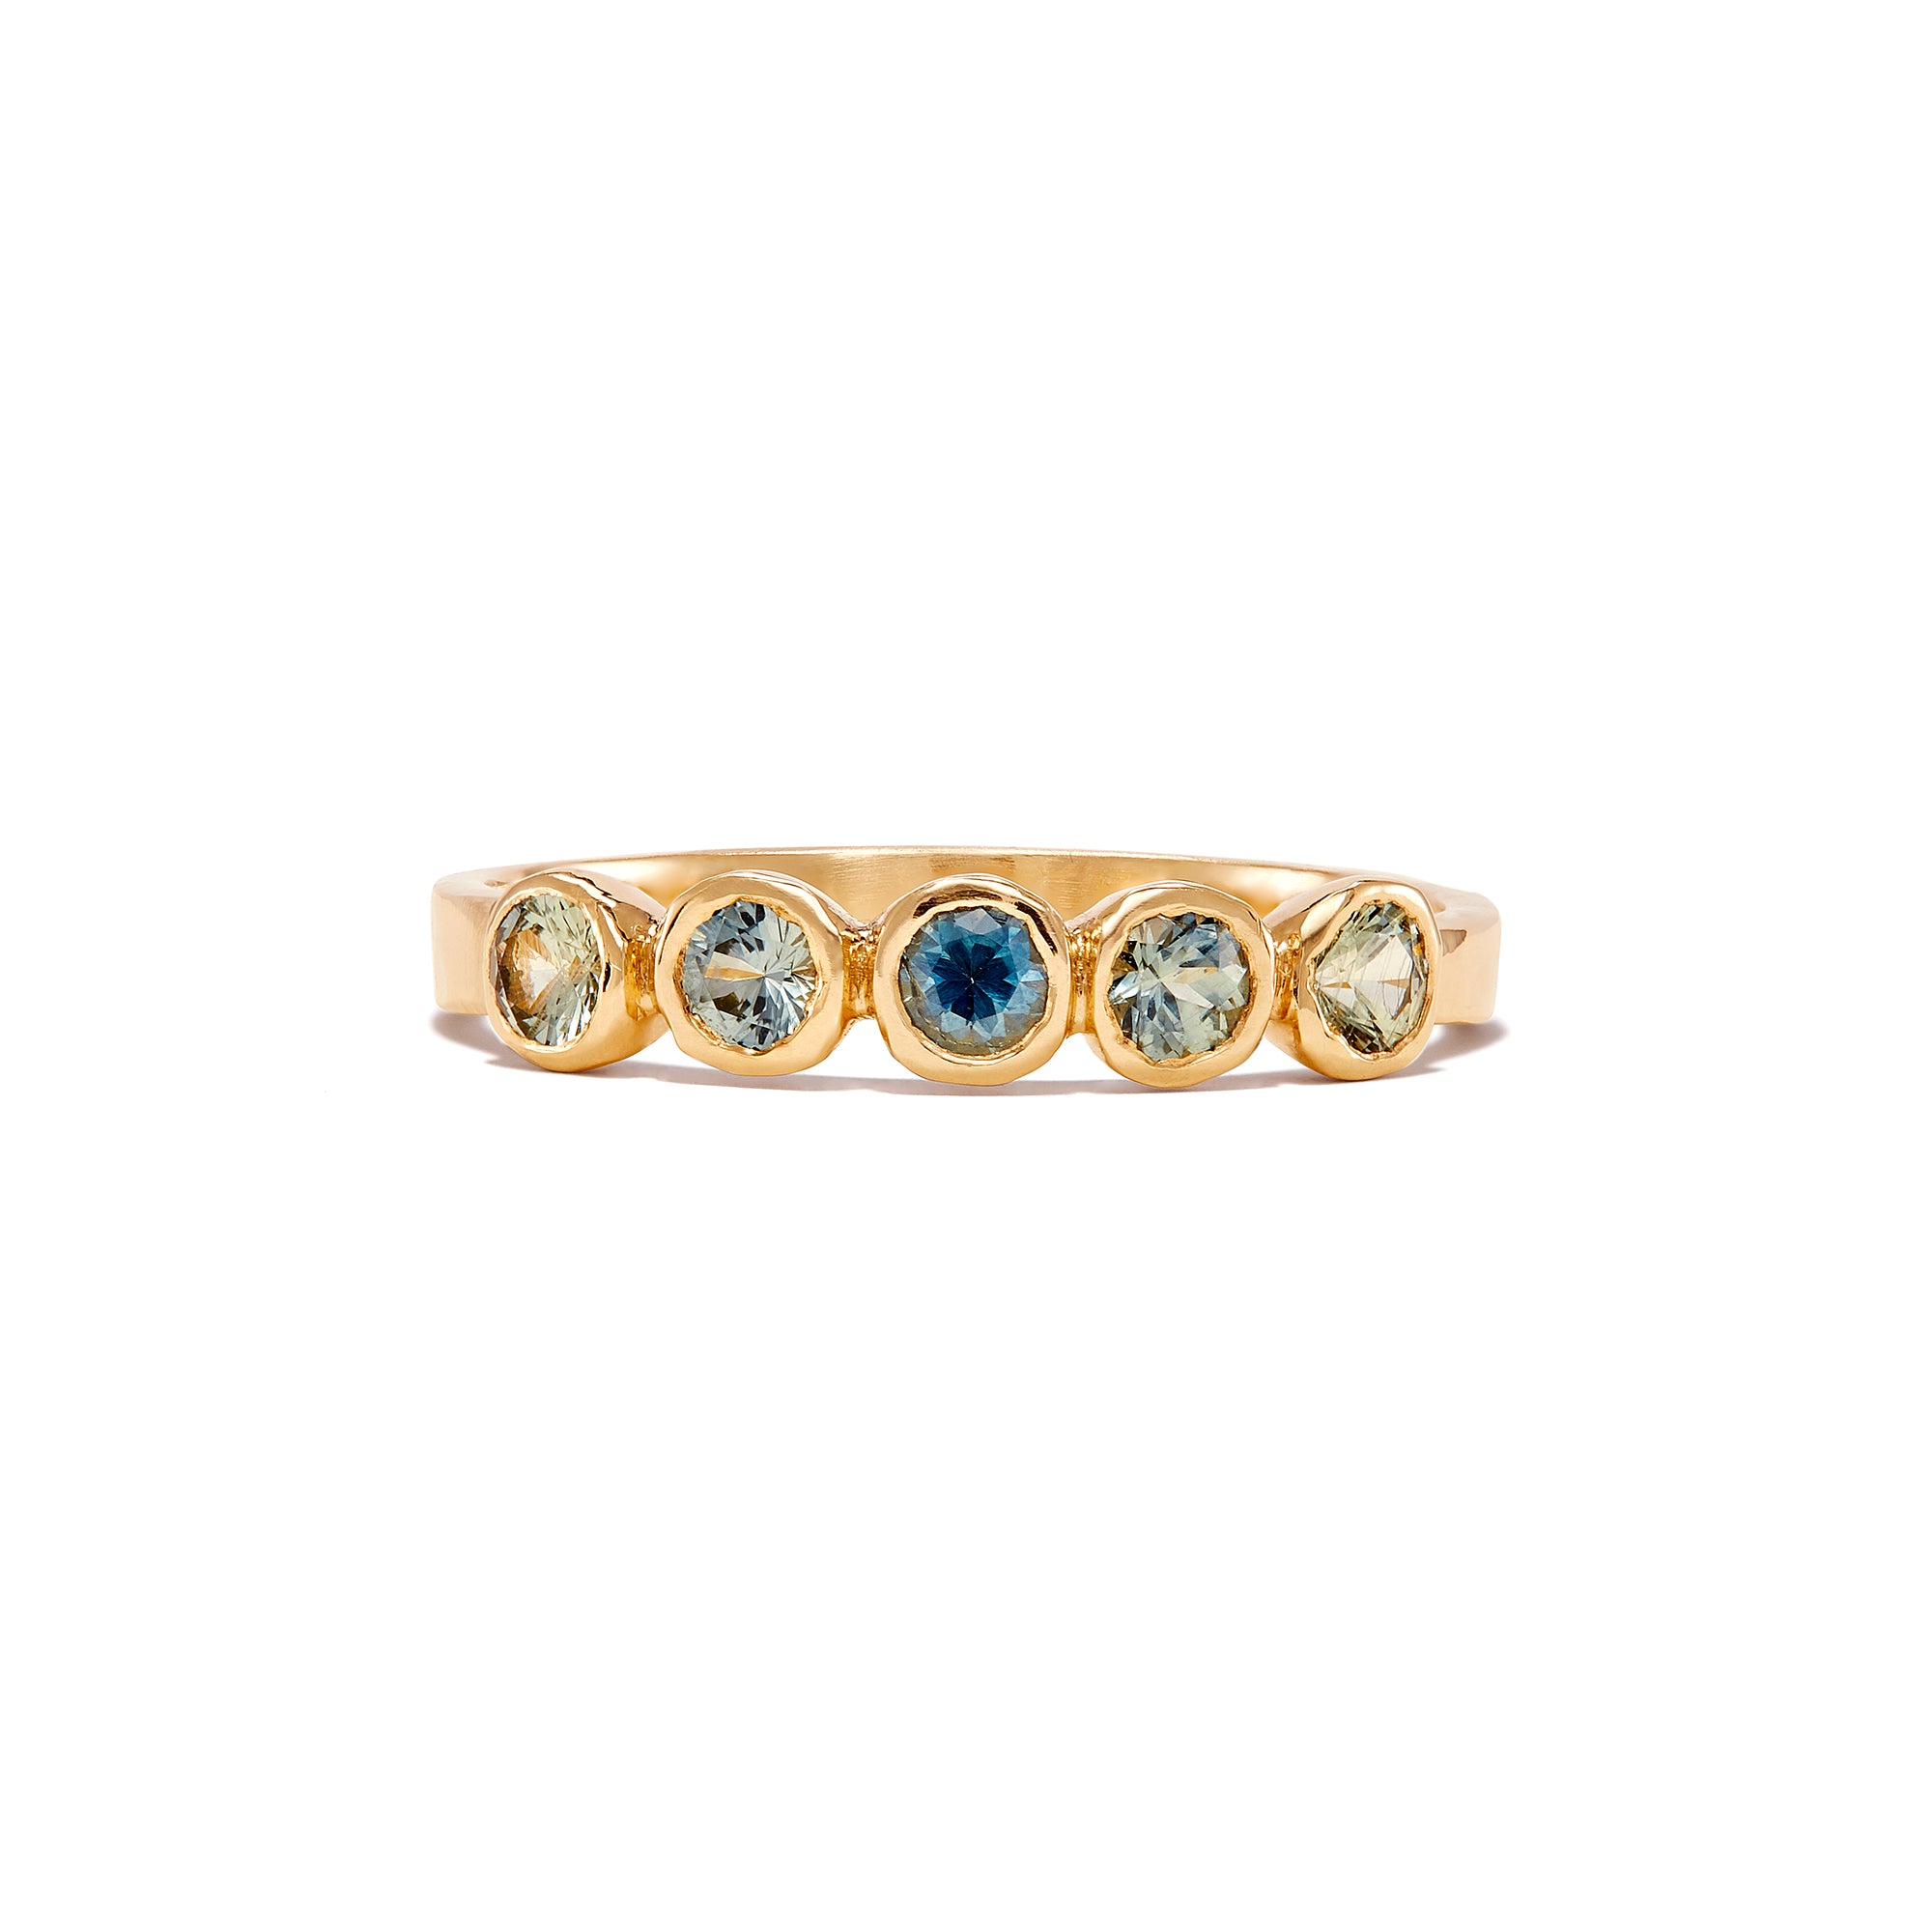 Limited Edition Blue Montana Sapphire Five Stone Ring